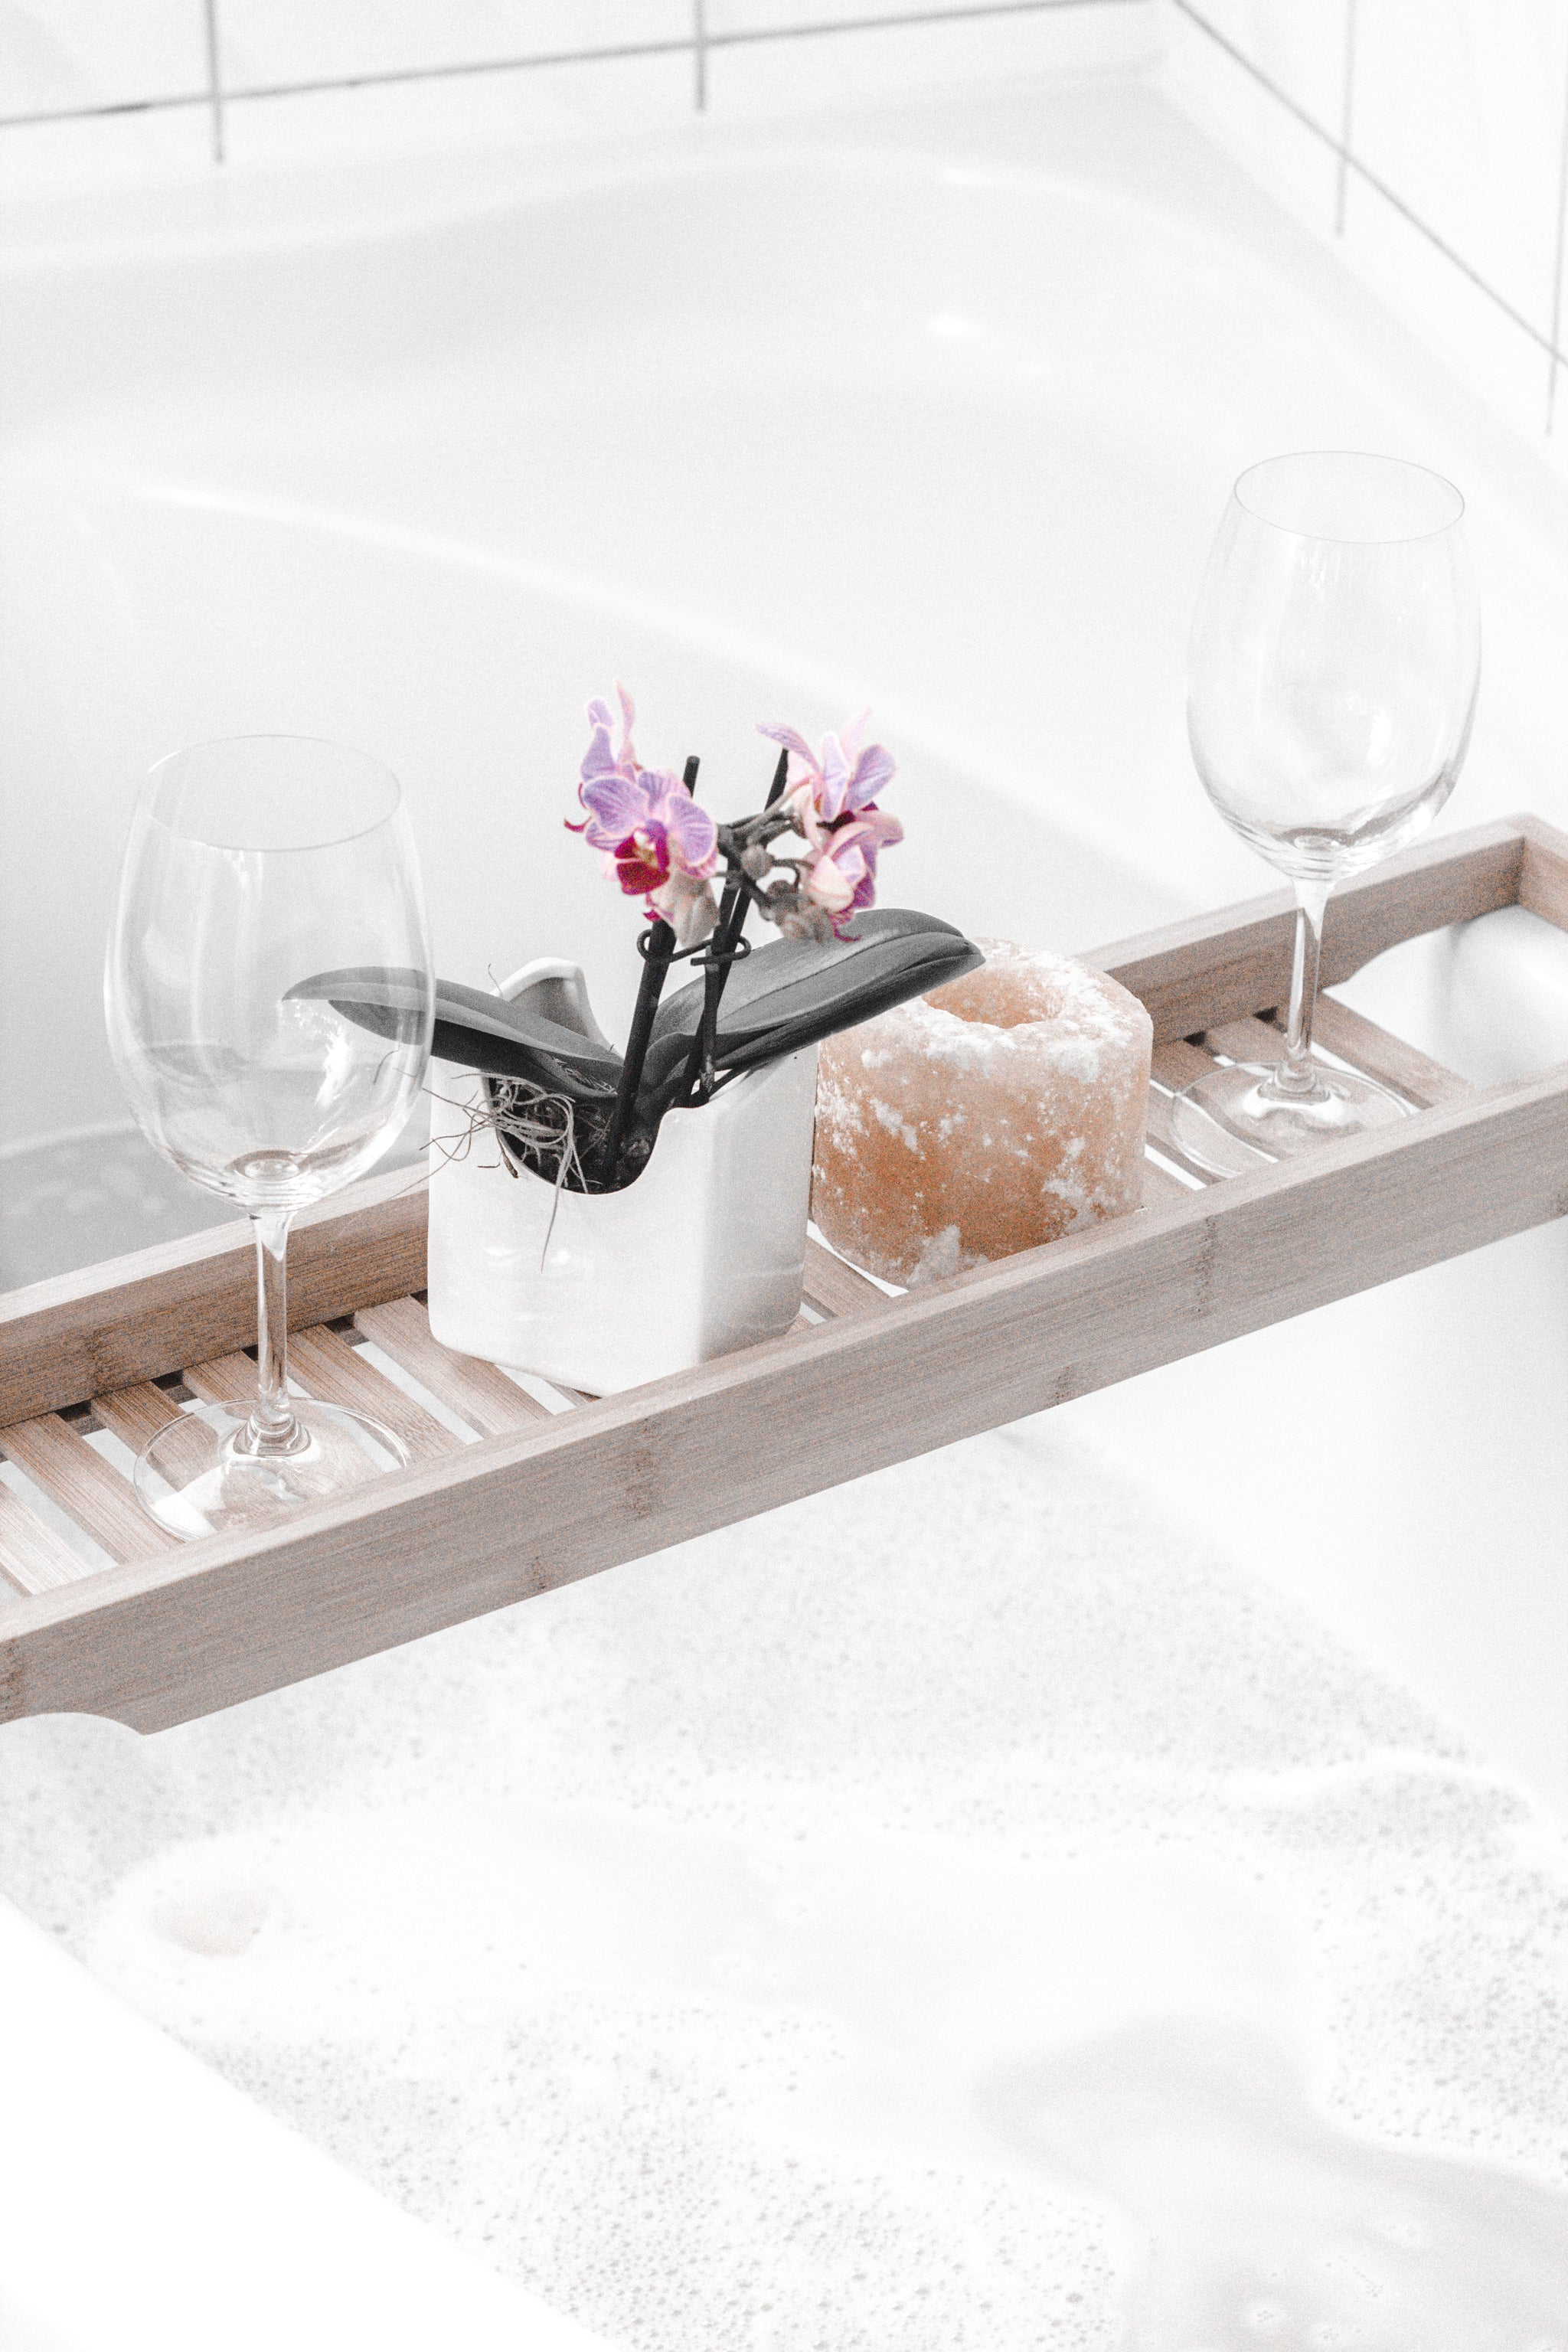 How to Create the Perfect Bath: 5 Steps